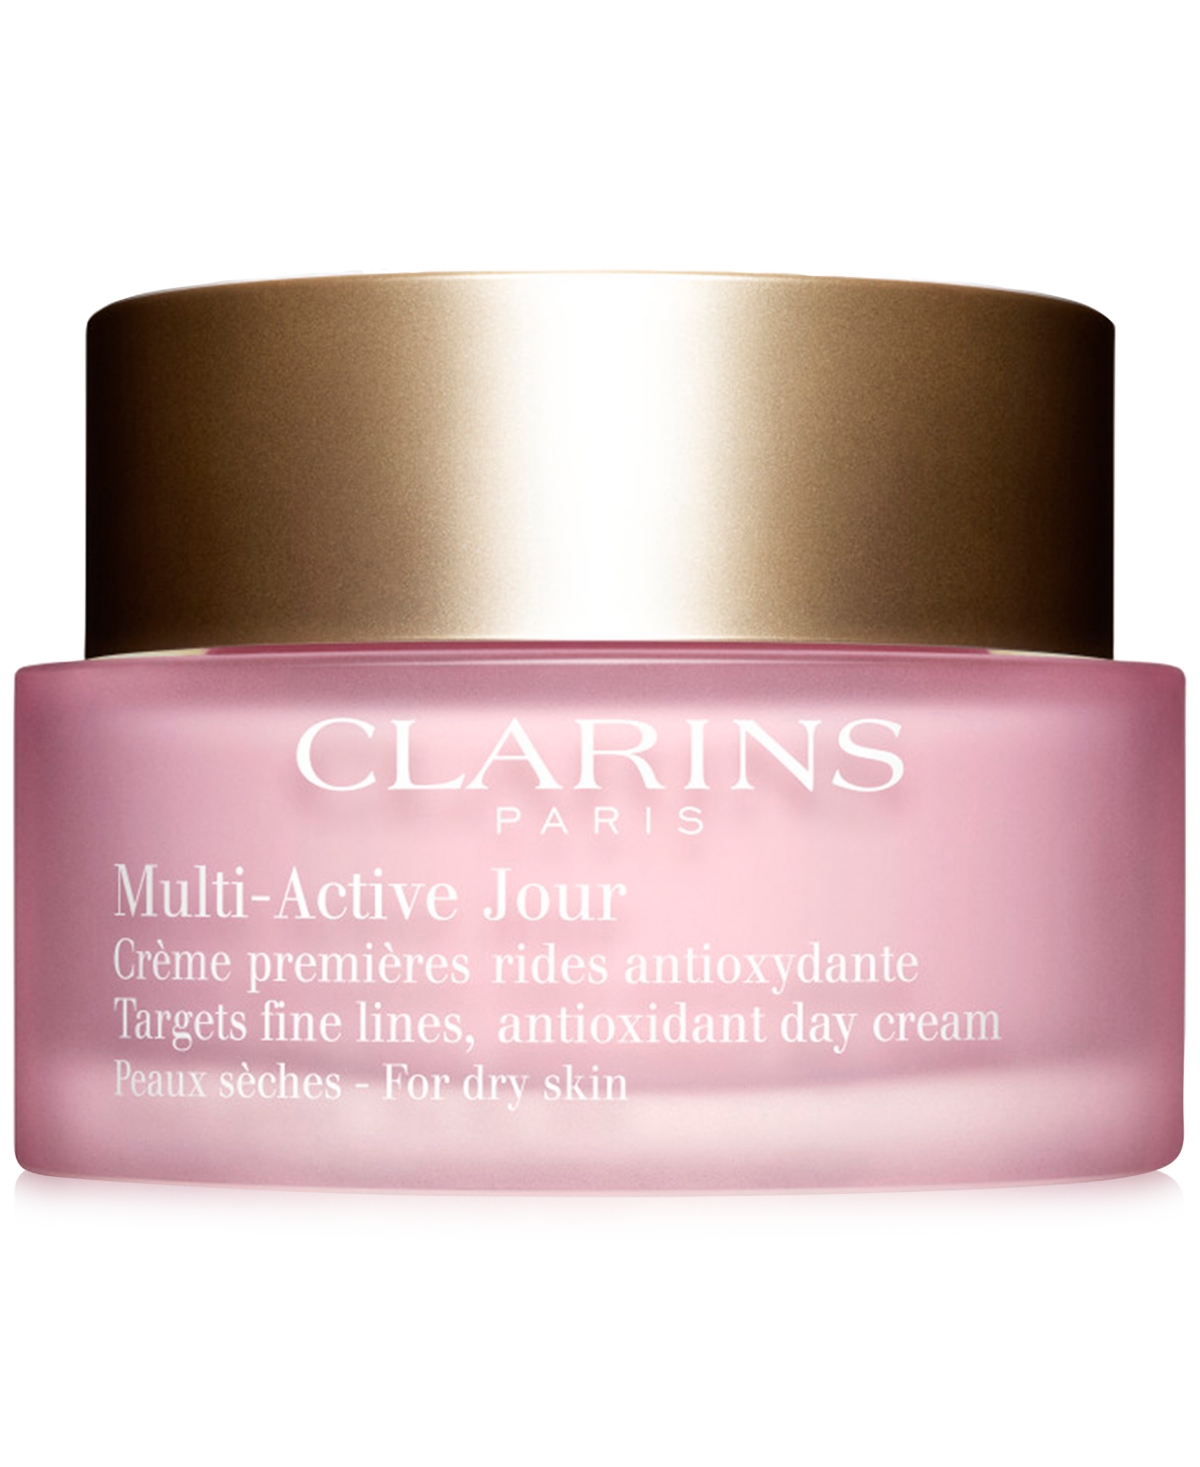 CLARINS MULTI-ACTIVE ANTI-AGING DAY MOISTURIZER FOR GLOWING SKIN, DRY SKIN, 1.6 OZ.